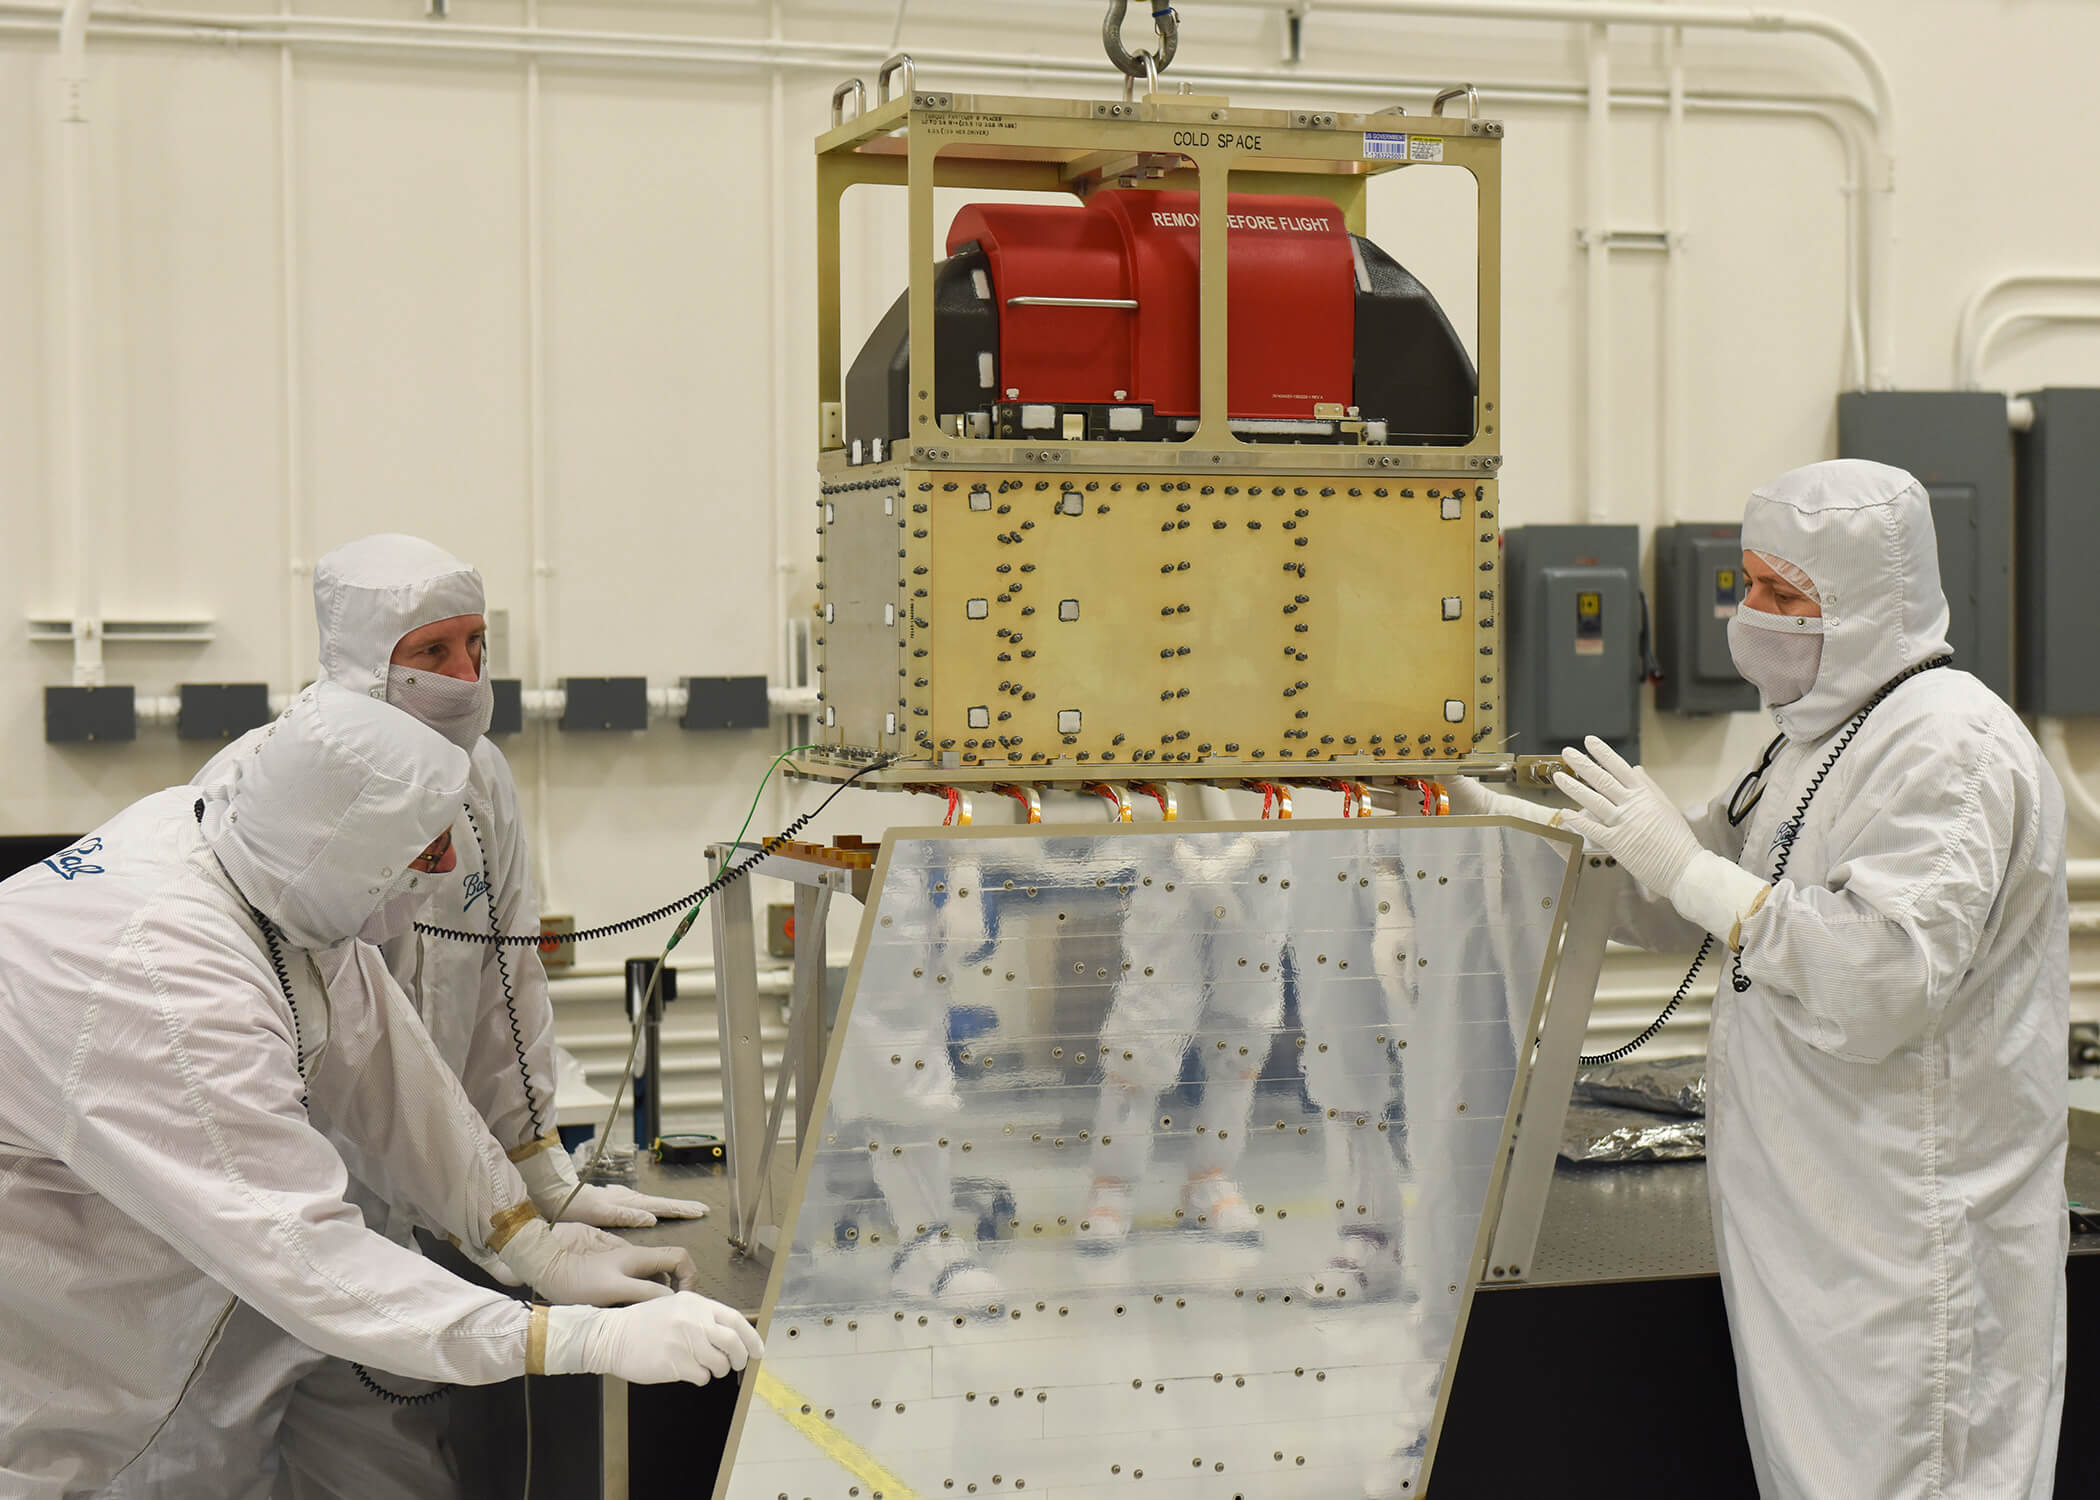 ALL INSTRUMENTS NOW INTEGRATED WITH JPSS-1 SPACECRAFT